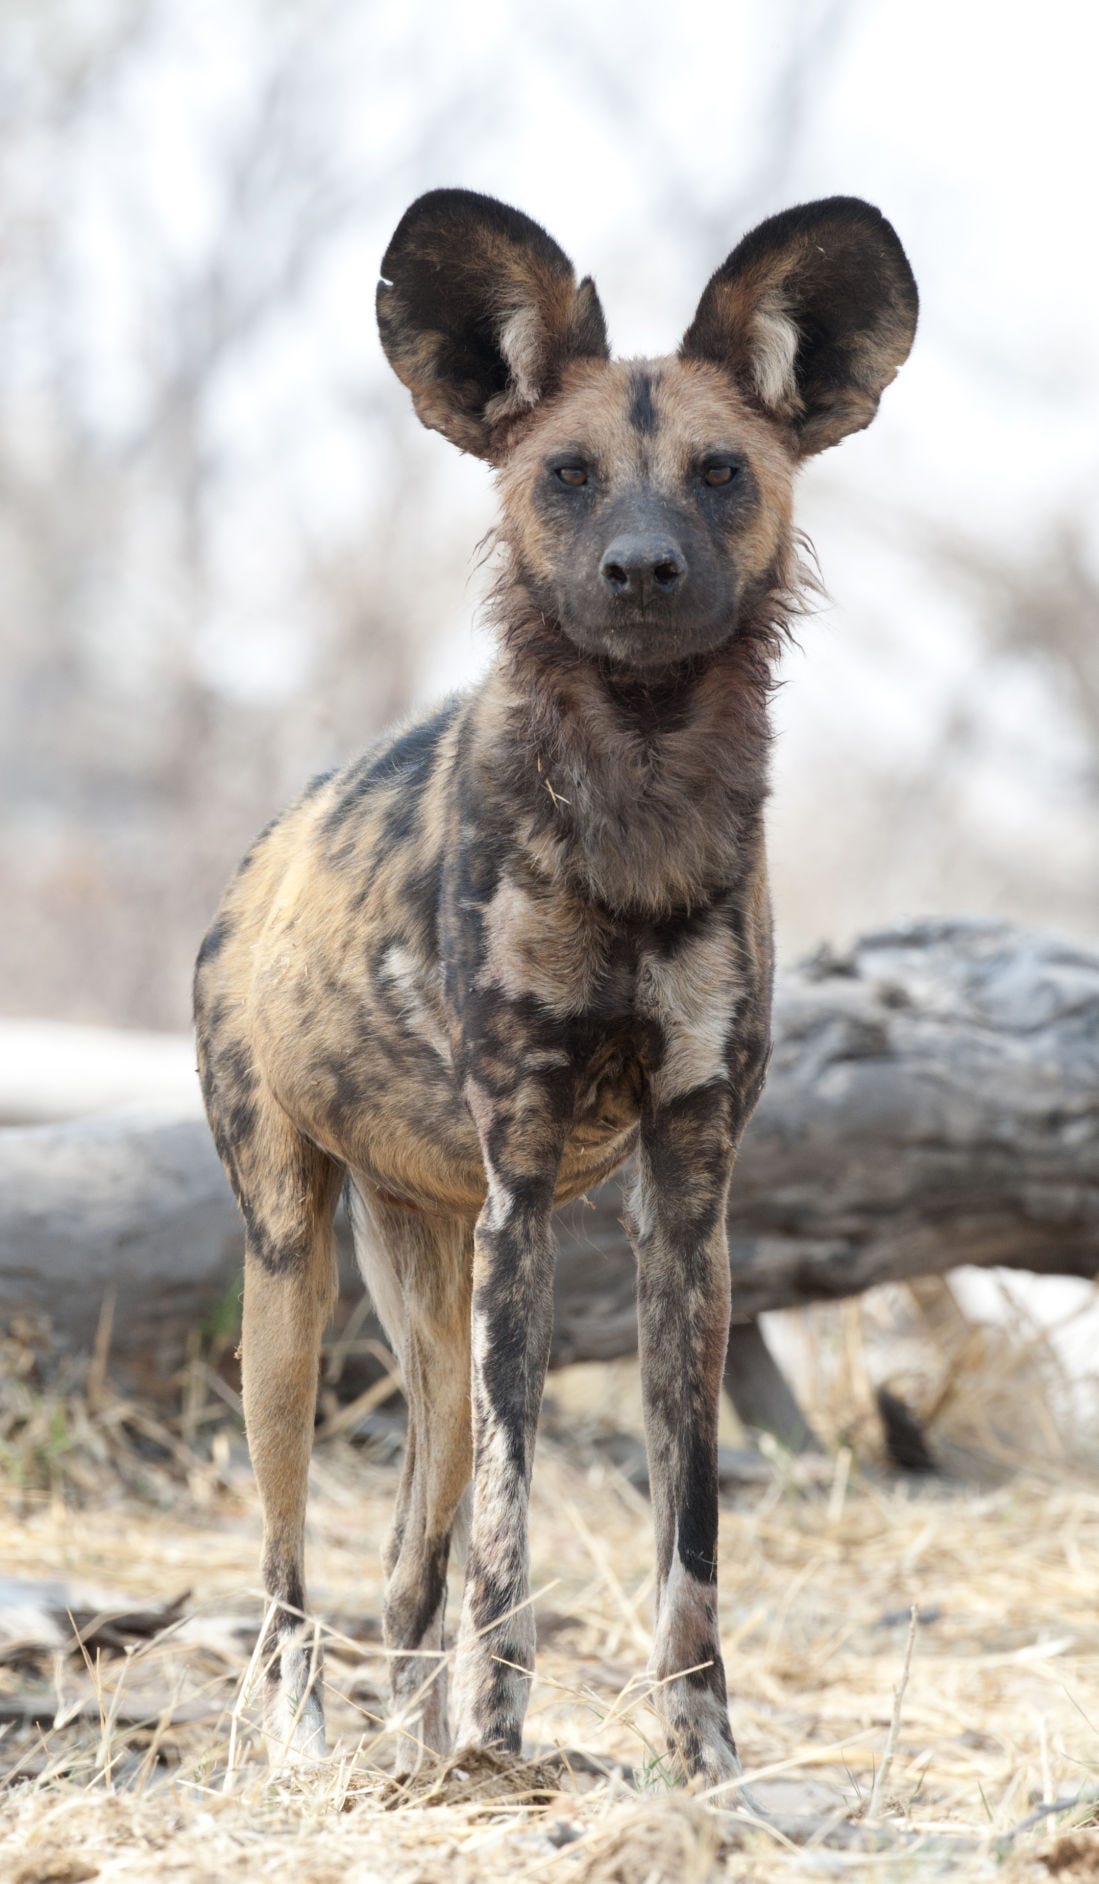 are hyenas members of the dog family